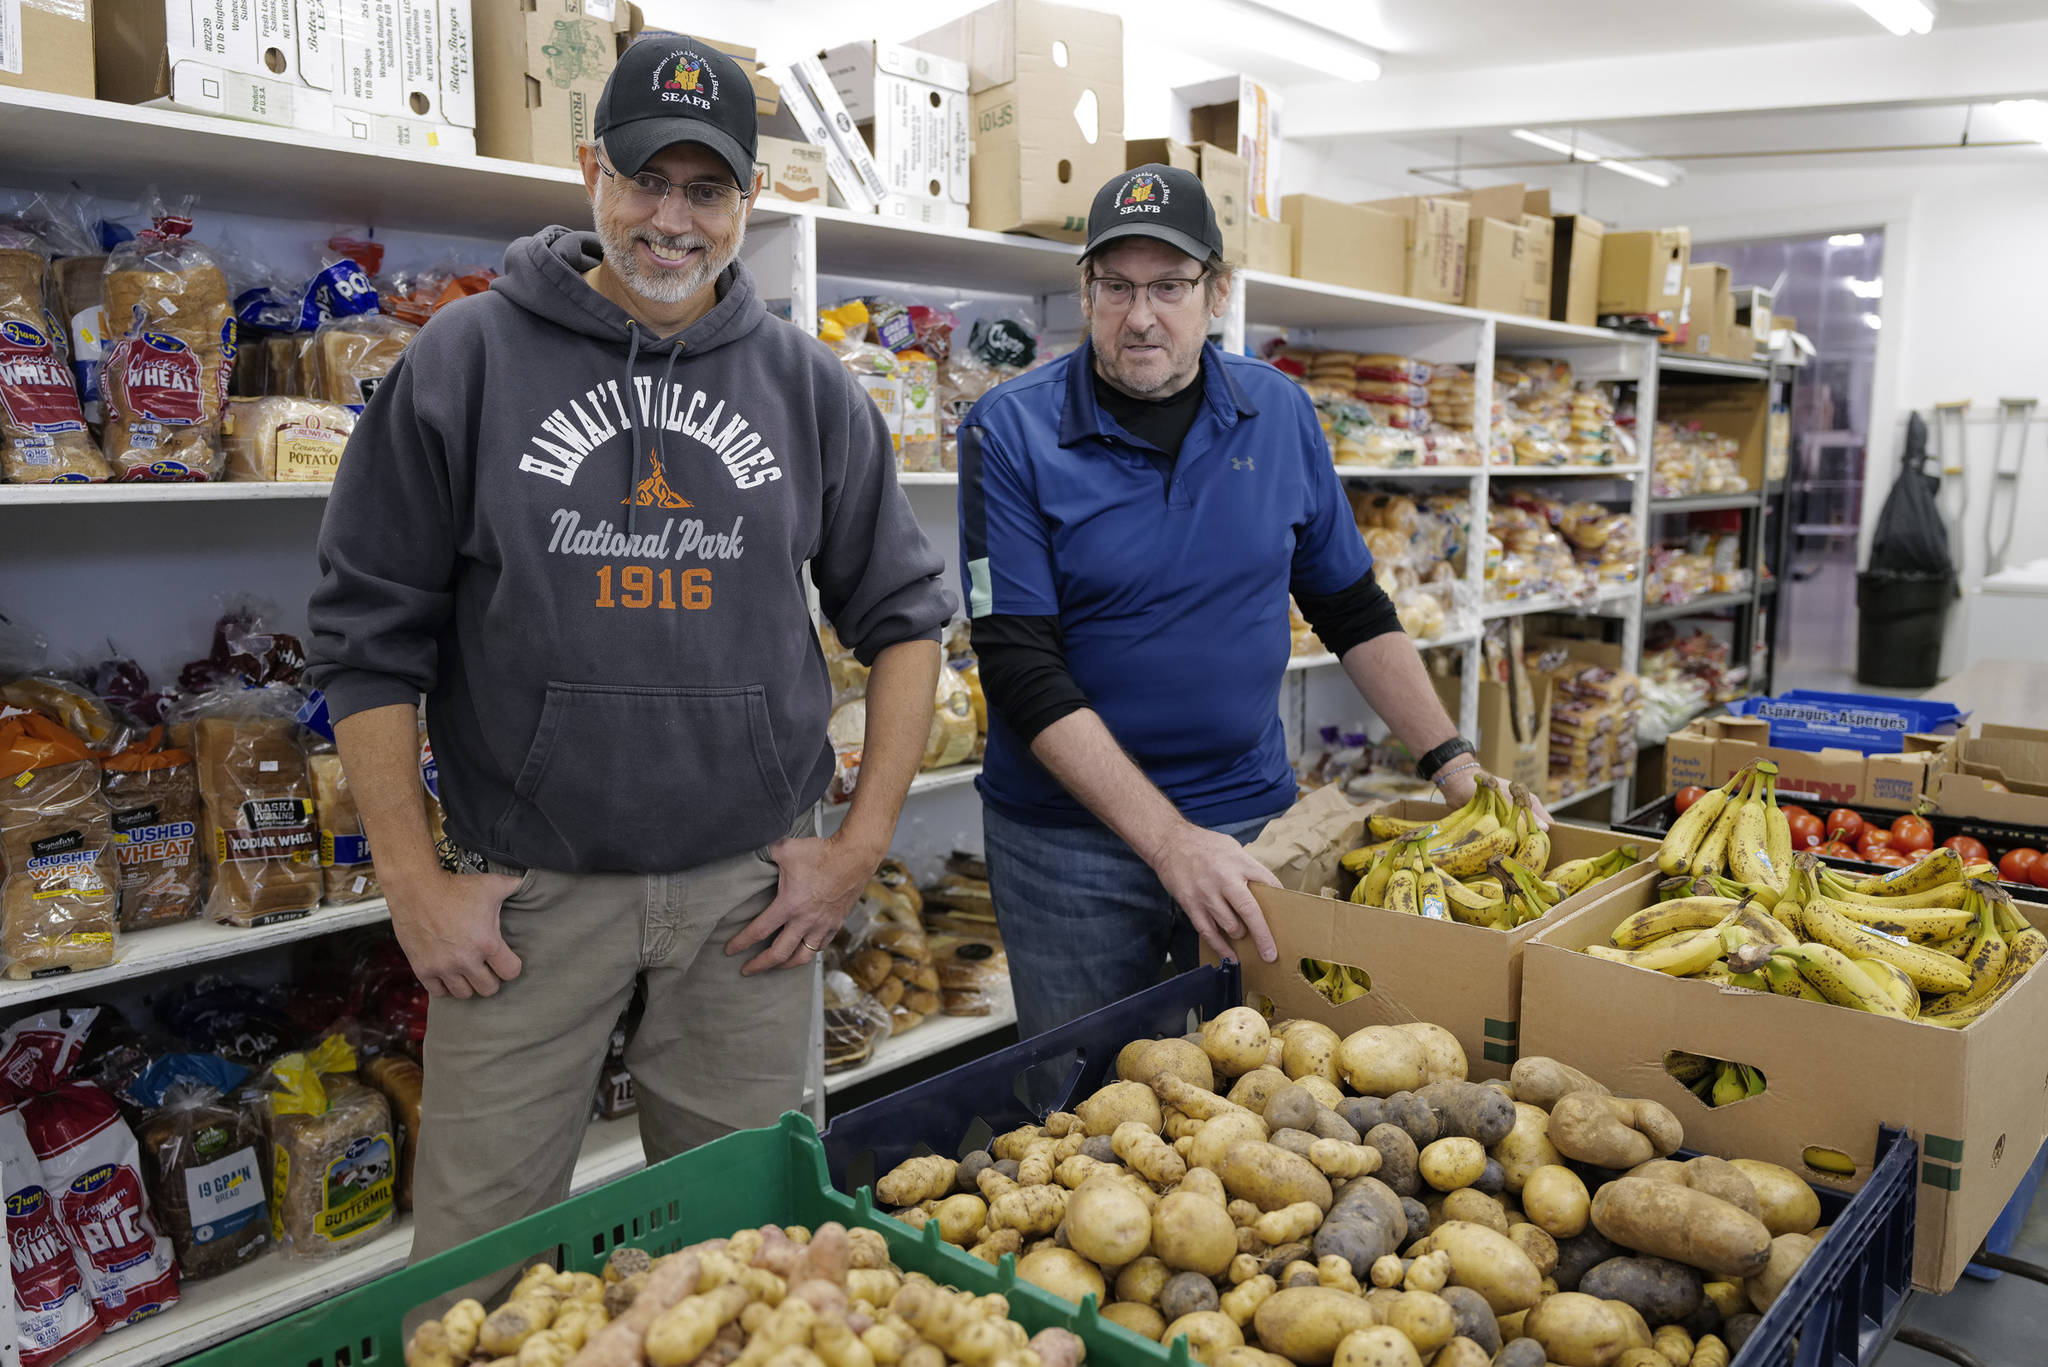 Southeast Alaska Food Bank manager Chris Schapp, left, looks over freshly-dug potatoes from the Juneau Community Garden with president Dave Lefebvre at the food bank on Crazy Horse Drive on Tuesday, Oct. 15, 2019. (Michael Penn | Juneau Empire)